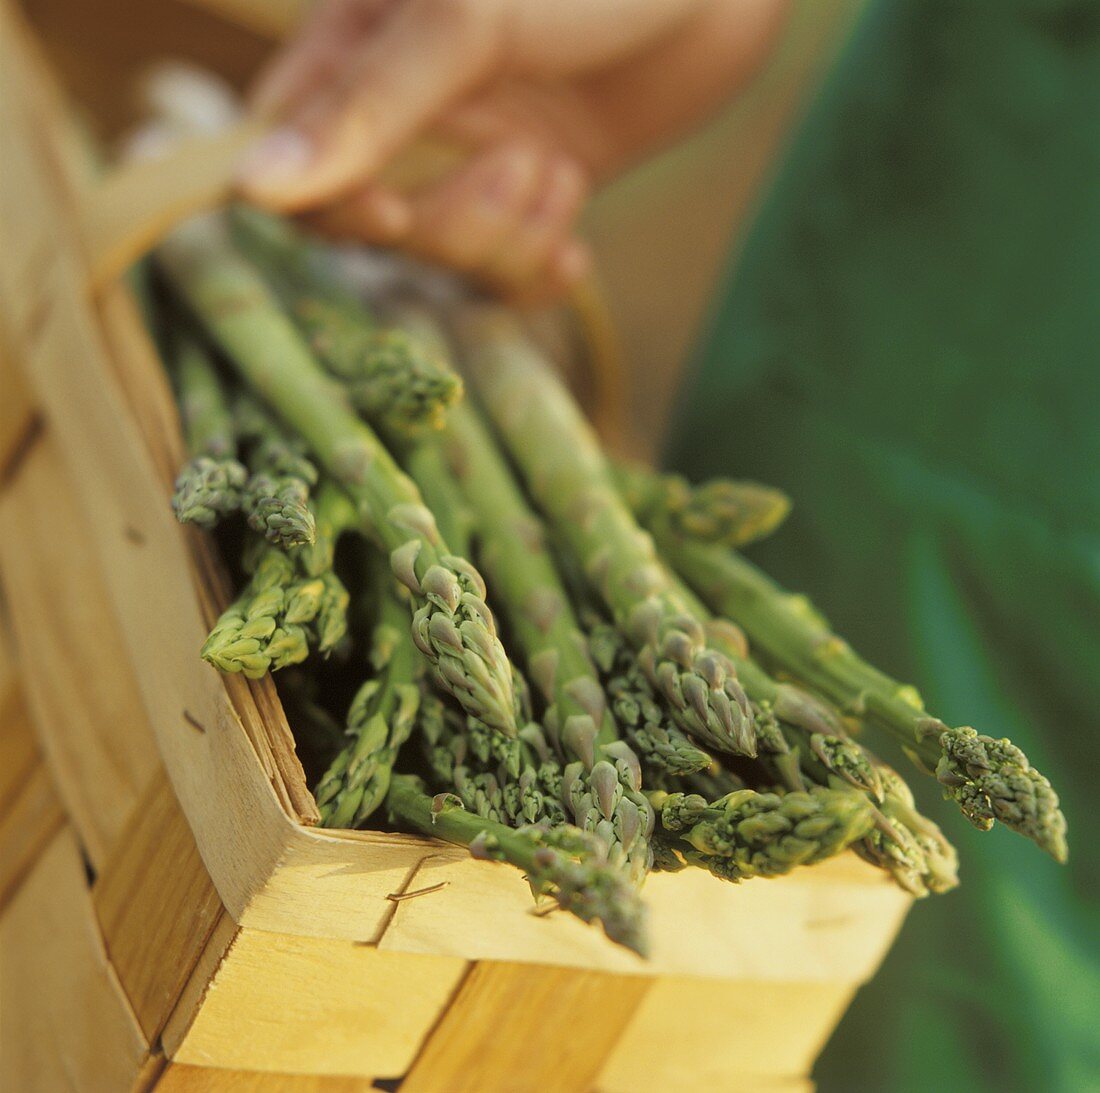 Freshly harvested green asparagus being carried in a basket